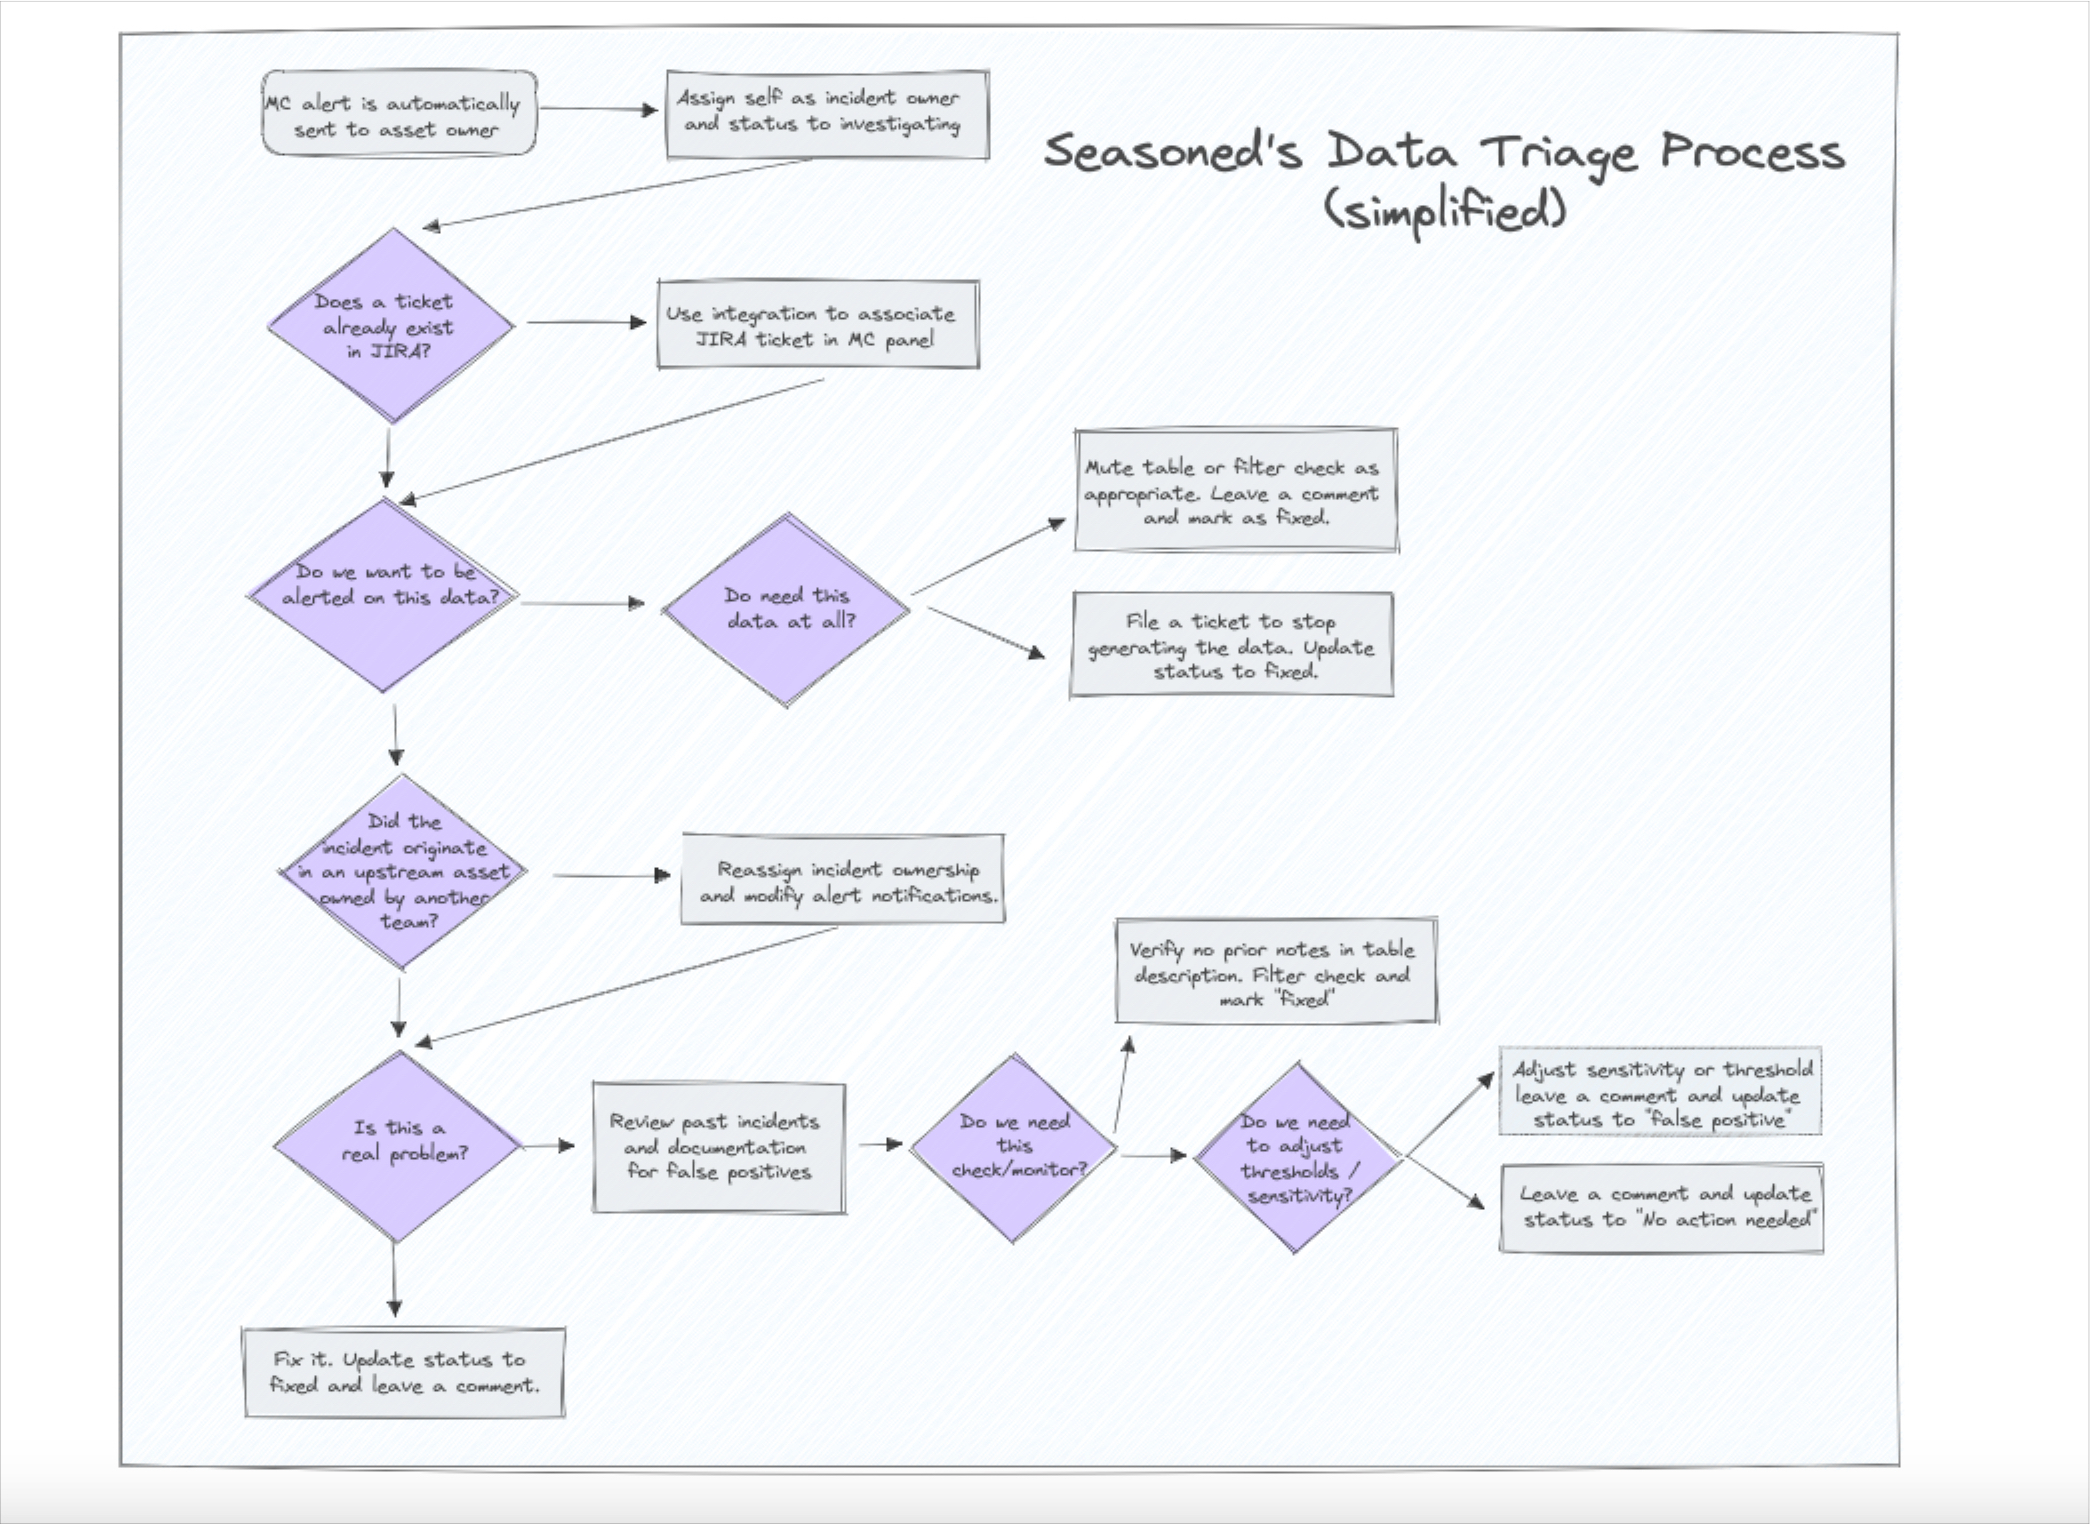 How Seasoned Optimized the Data Incident Management Process to Improve Data Quality at Scale